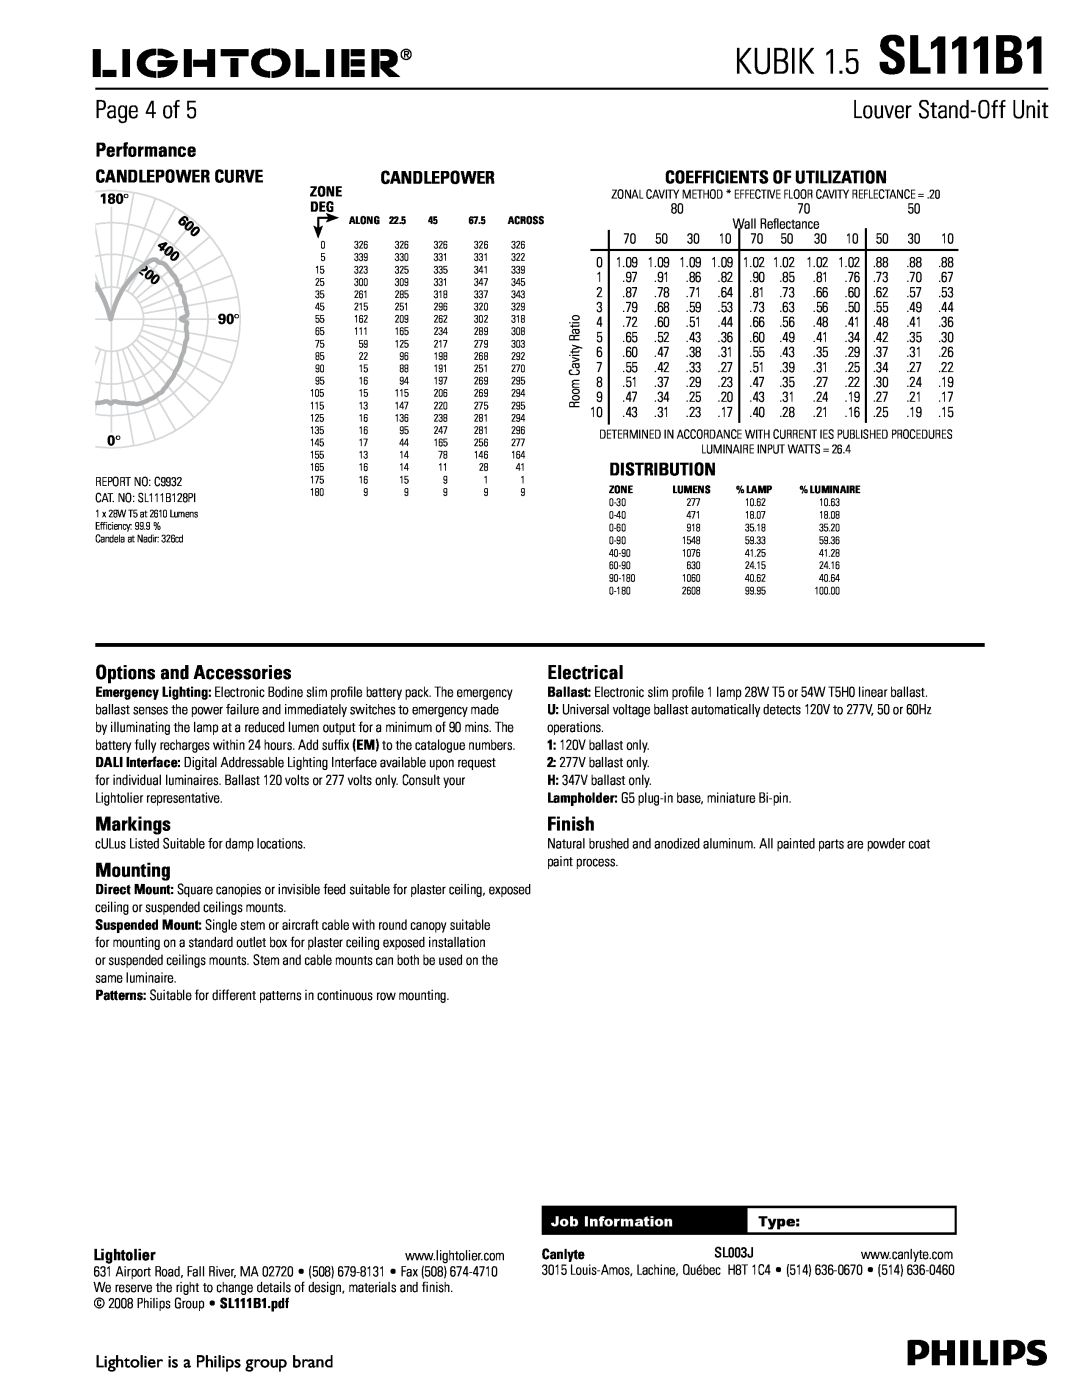 Lightolier KUBIK 1.5 SL111B1, Page 4 of, Performance, 600, Options and Accessories, Electrical, Markings, Mounting 